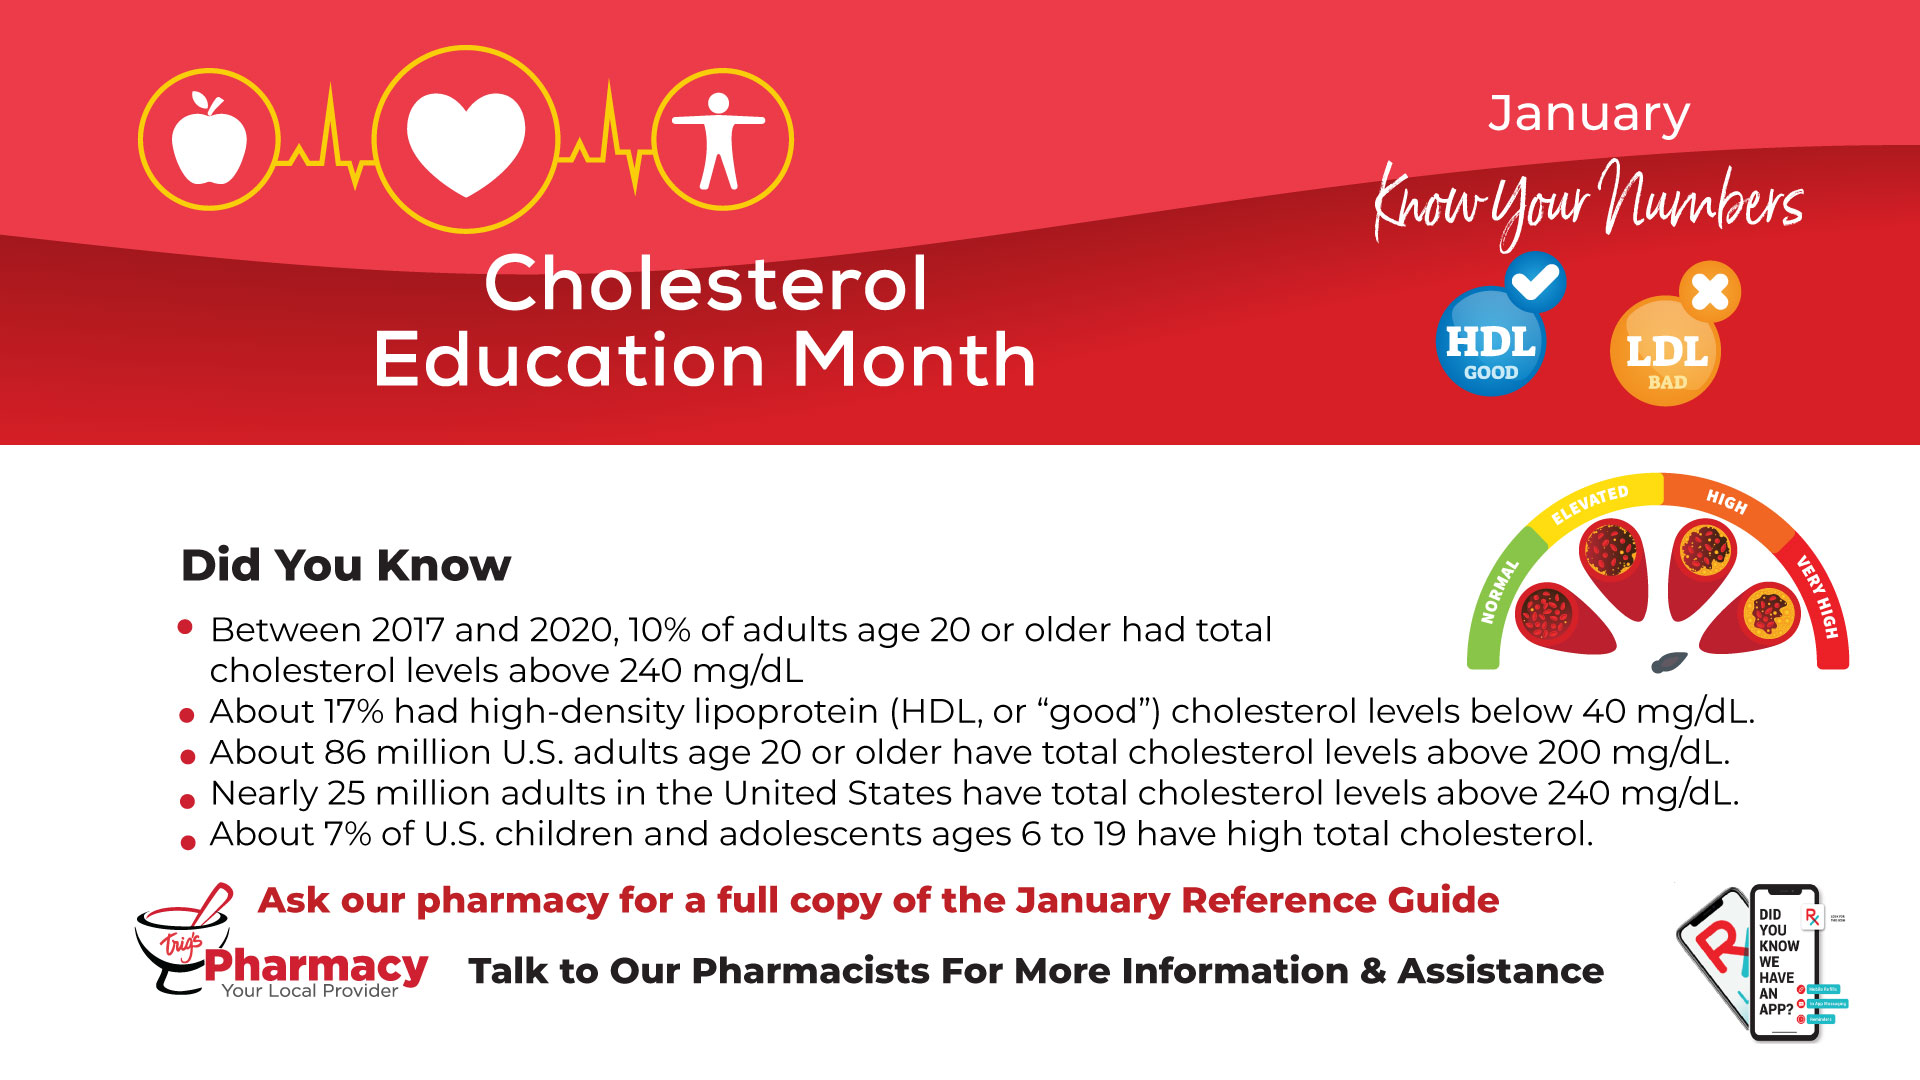 Download your January Know Your Numbers Cholesterol Awareness Guide.